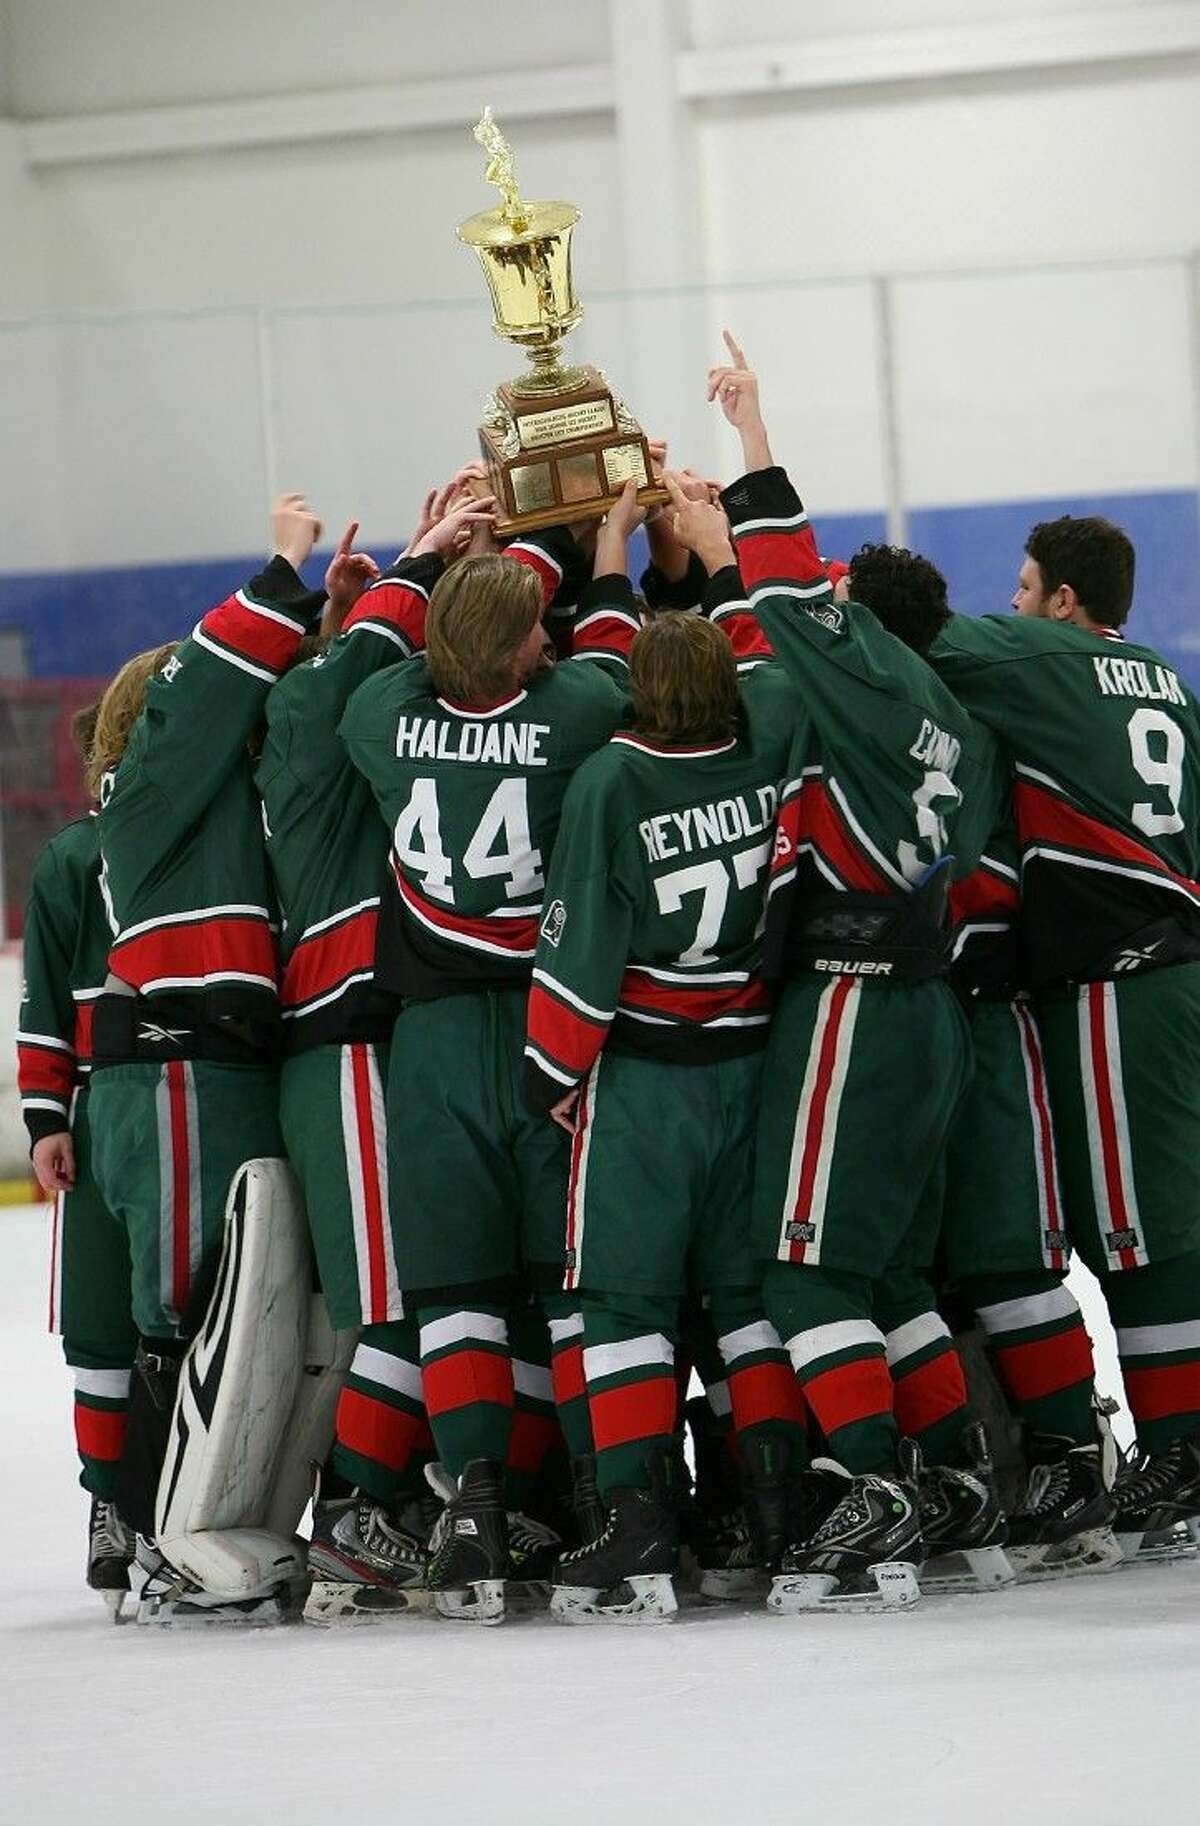 The Woodlands Hockey team celebrates after defeating Cinco Ranch 5-3 in the 2015-2016 ISHL Justice Cup City Championship game.